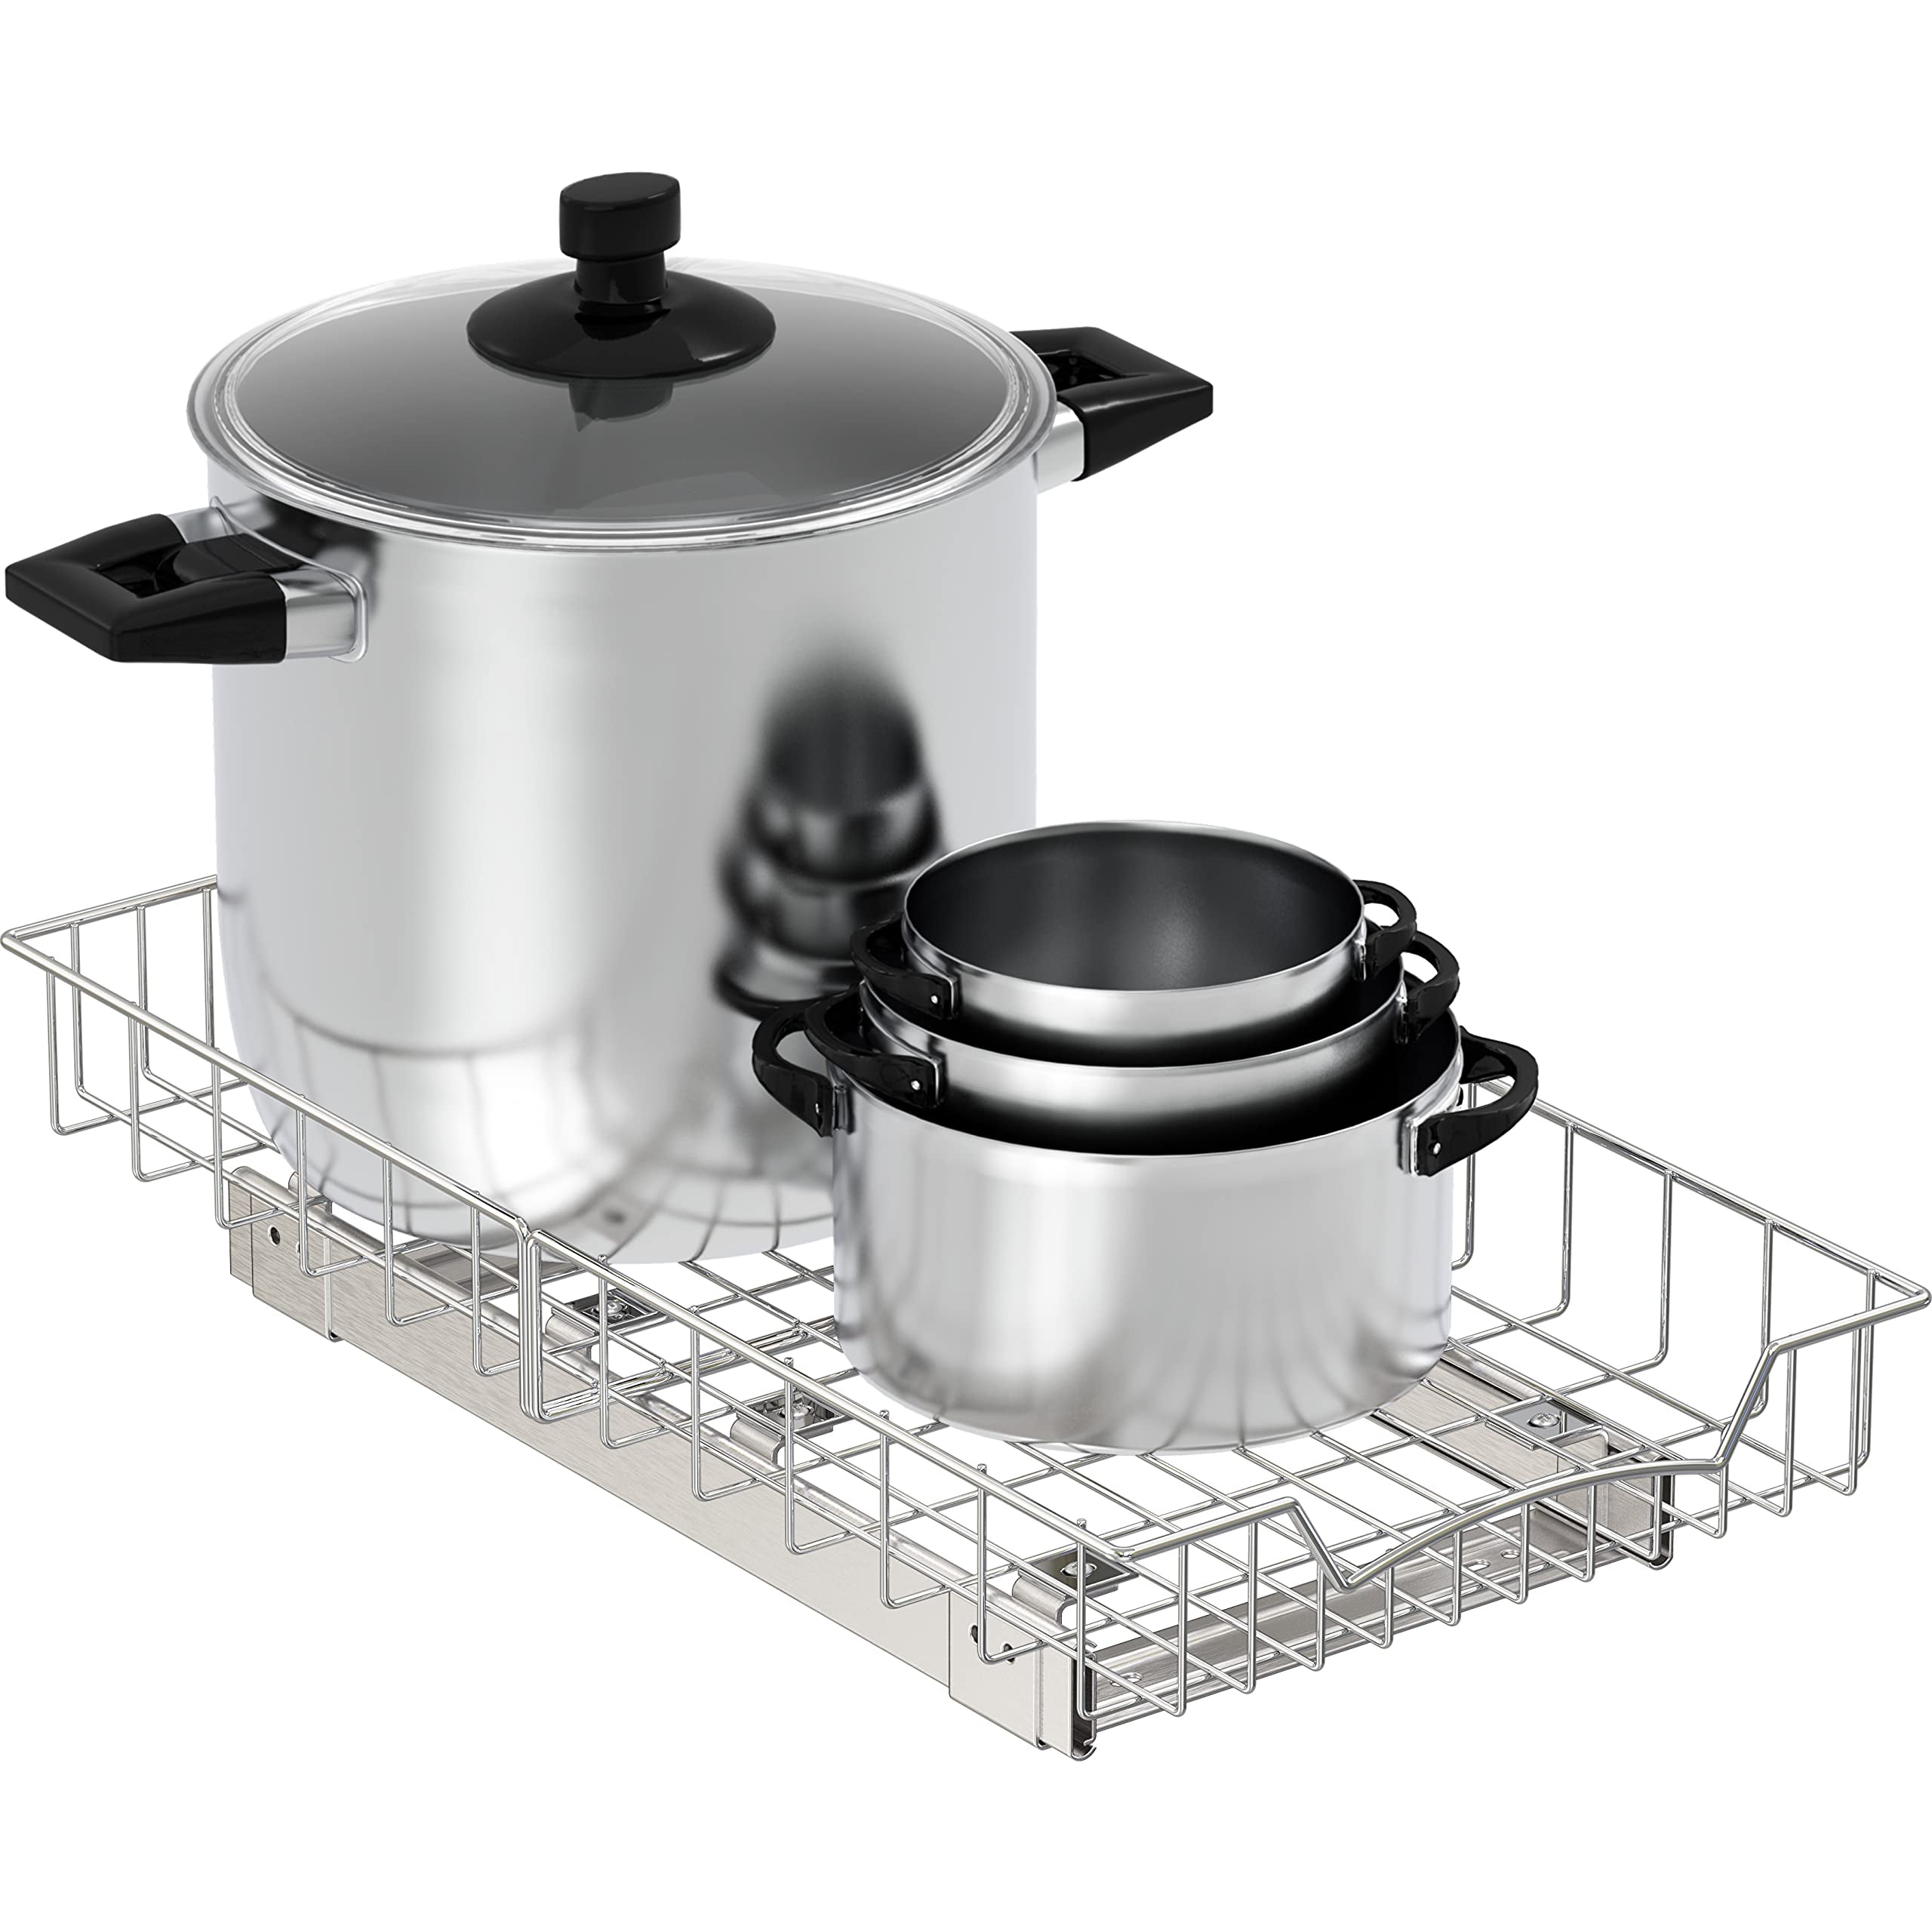 Simple Houseware Organizer Pull Out Under Cabinet Sliding Shelf for Kitchen,Bathroom, Pantry Pan and Pot Lid, Silver